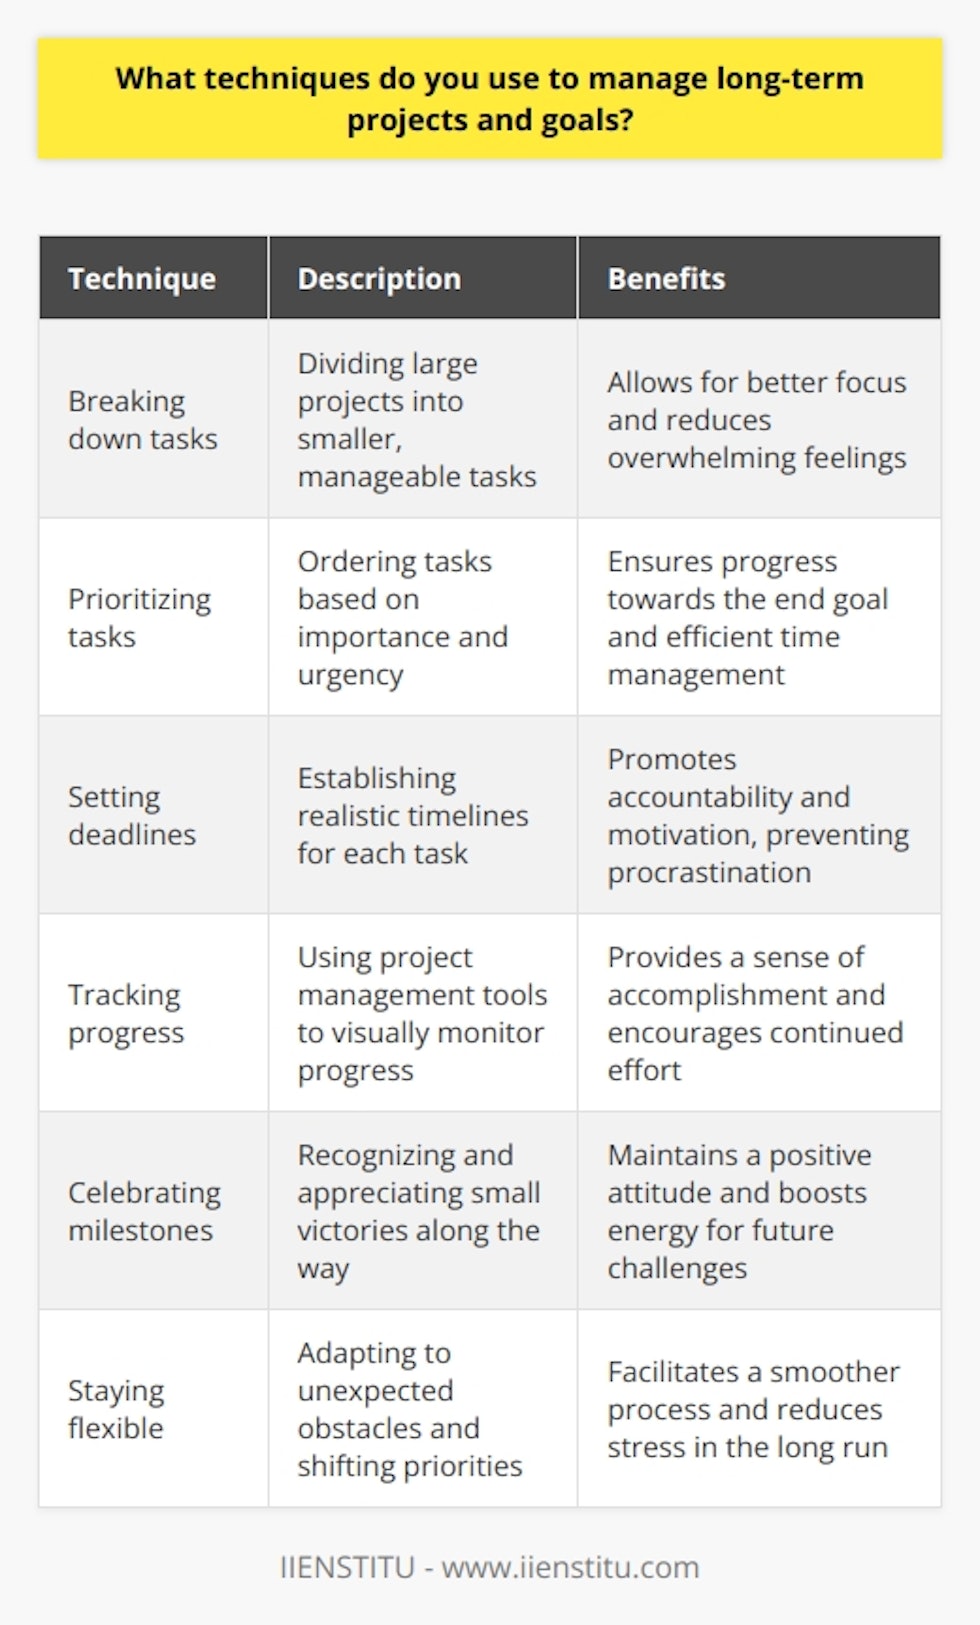 To effectively manage long-term projects and goals, I break them down into smaller, manageable tasks. This allows me to focus on one step at a time and not get overwhelmed by the bigger picture. Prioritizing Tasks I prioritize these tasks based on their importance and urgency. The most critical and time-sensitive tasks get tackled first. This ensures that Im always making progress towards my end goal, even if its just a little bit each day. Setting Deadlines For each task, I set realistic deadlines for myself. Having a timeline keeps me accountable and motivated to stay on track. Ive found that without deadlines, its easy to procrastinate and let projects drag on indefinitely. Tracking Progress To stay organized, I use project management tools like Trello or Asana. These let me visually track my progress and see how far Ive come. Seeing those completed tasks stack up is a great feeling and pushes me to keep going. Celebrating Milestones I also make sure to celebrate the small victories along the way. Reaching a milestone, no matter how minor, deserves recognition. Taking a moment to appreciate how far Ive come helps me stay positive and energized for the road ahead. Staying Flexible Finally, Ive learned to be adaptable. Sometimes unexpected obstacles pop up or priorities shift. When that happens, I reassess and adjust my plan as needed. Being rigid and resistant to change only makes the process harder in the long run. By using these techniques, Im able to stay organized, motivated, and on track to reach my long-term goals. Its not always easy, but breaking things down and celebrating the small wins makes even the most daunting projects feel achievable.